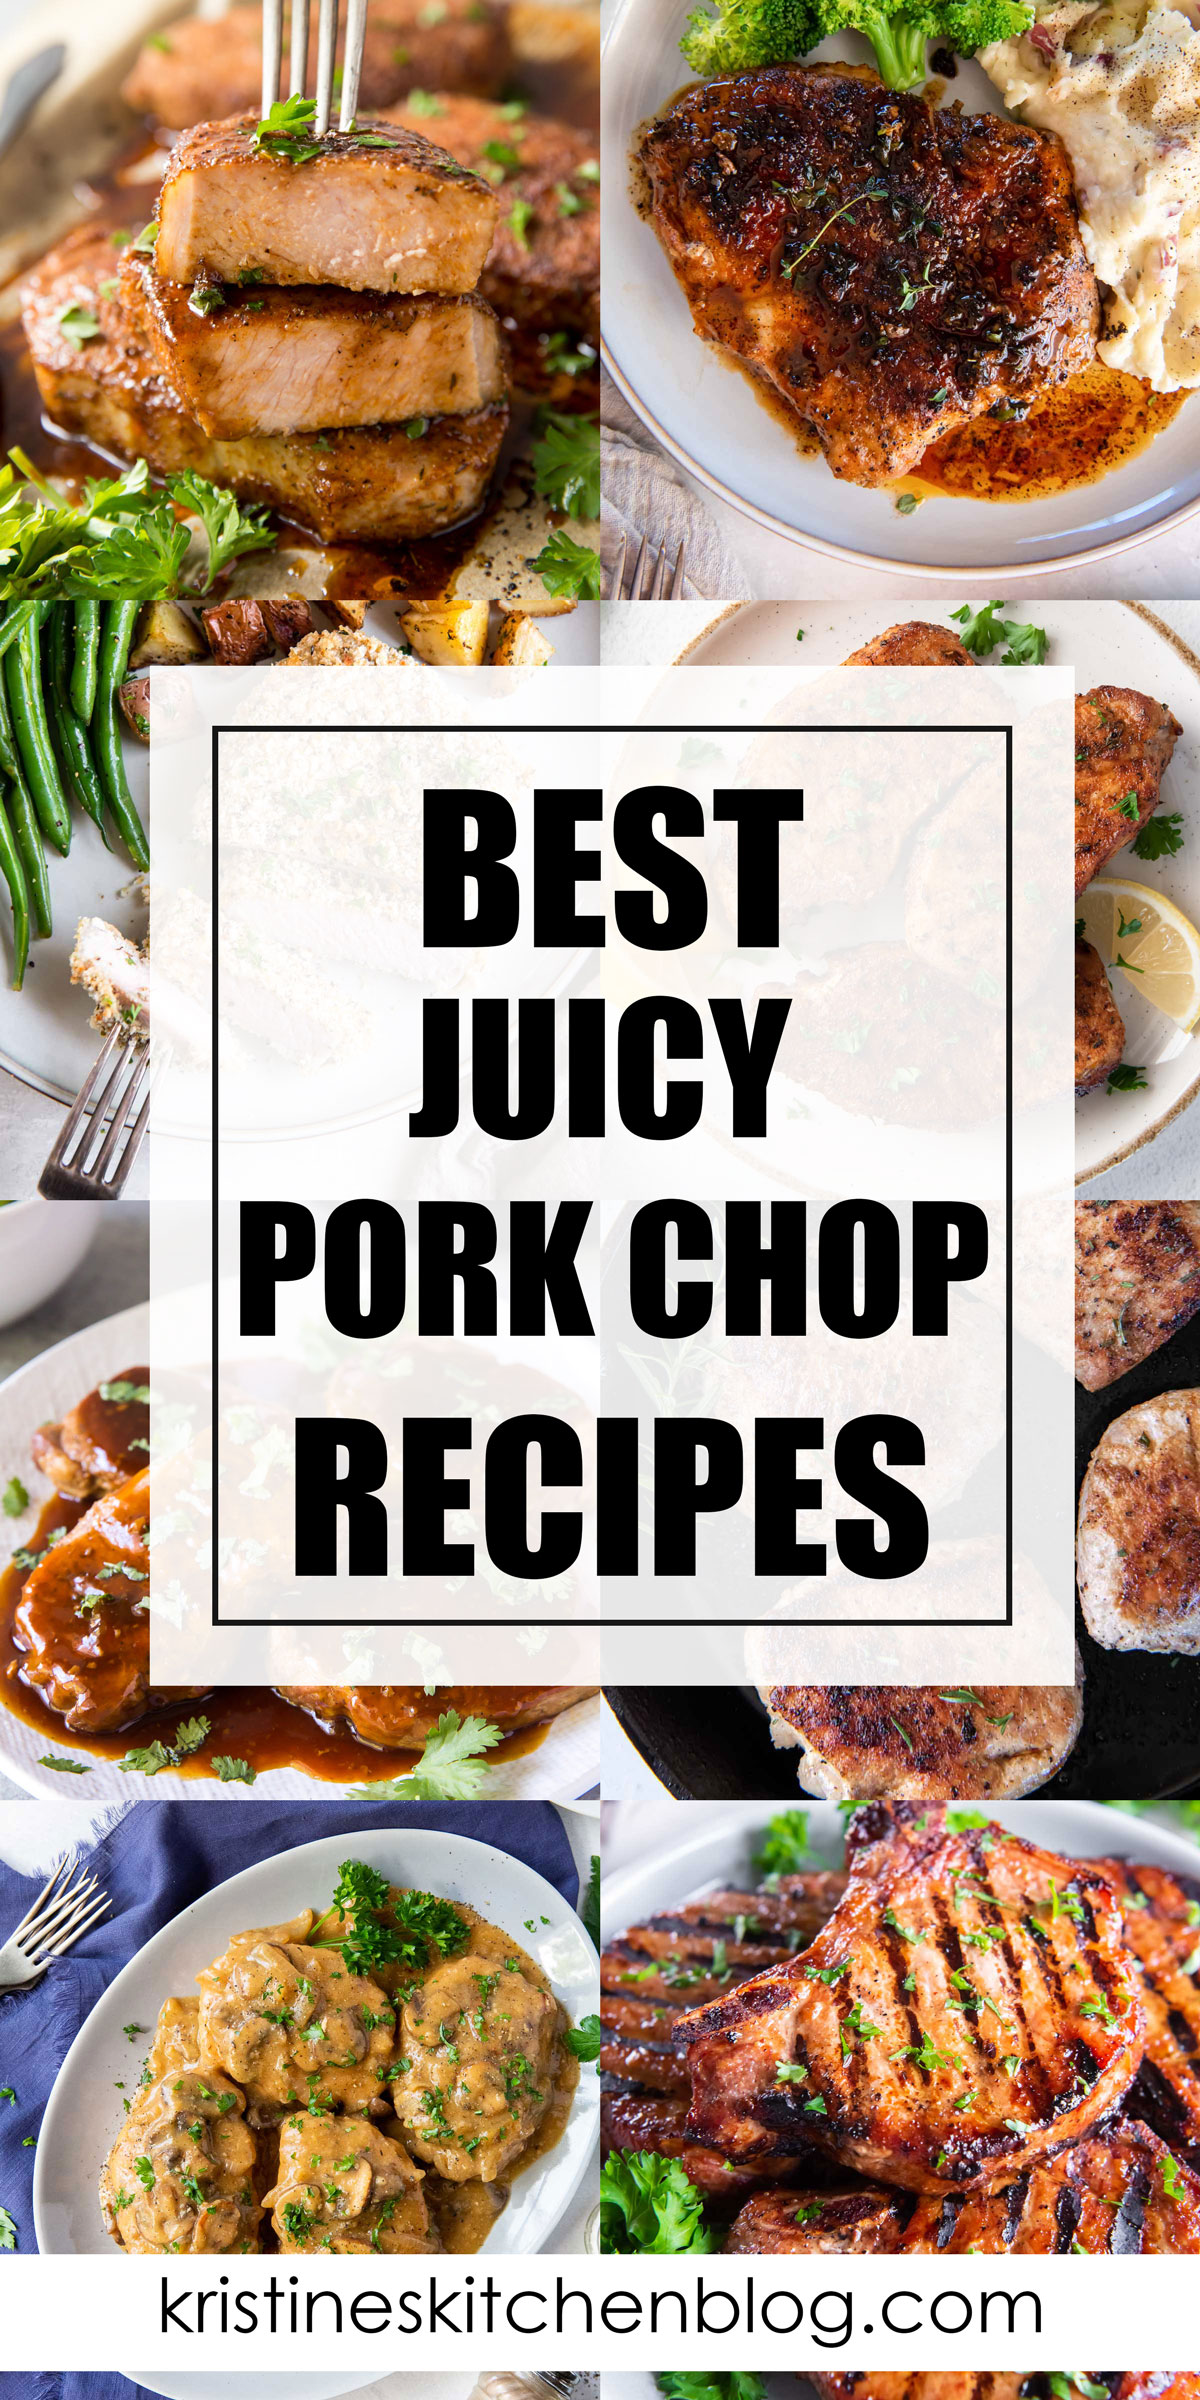 Collage of 8 images showing various pork chop recipes with text overlay.